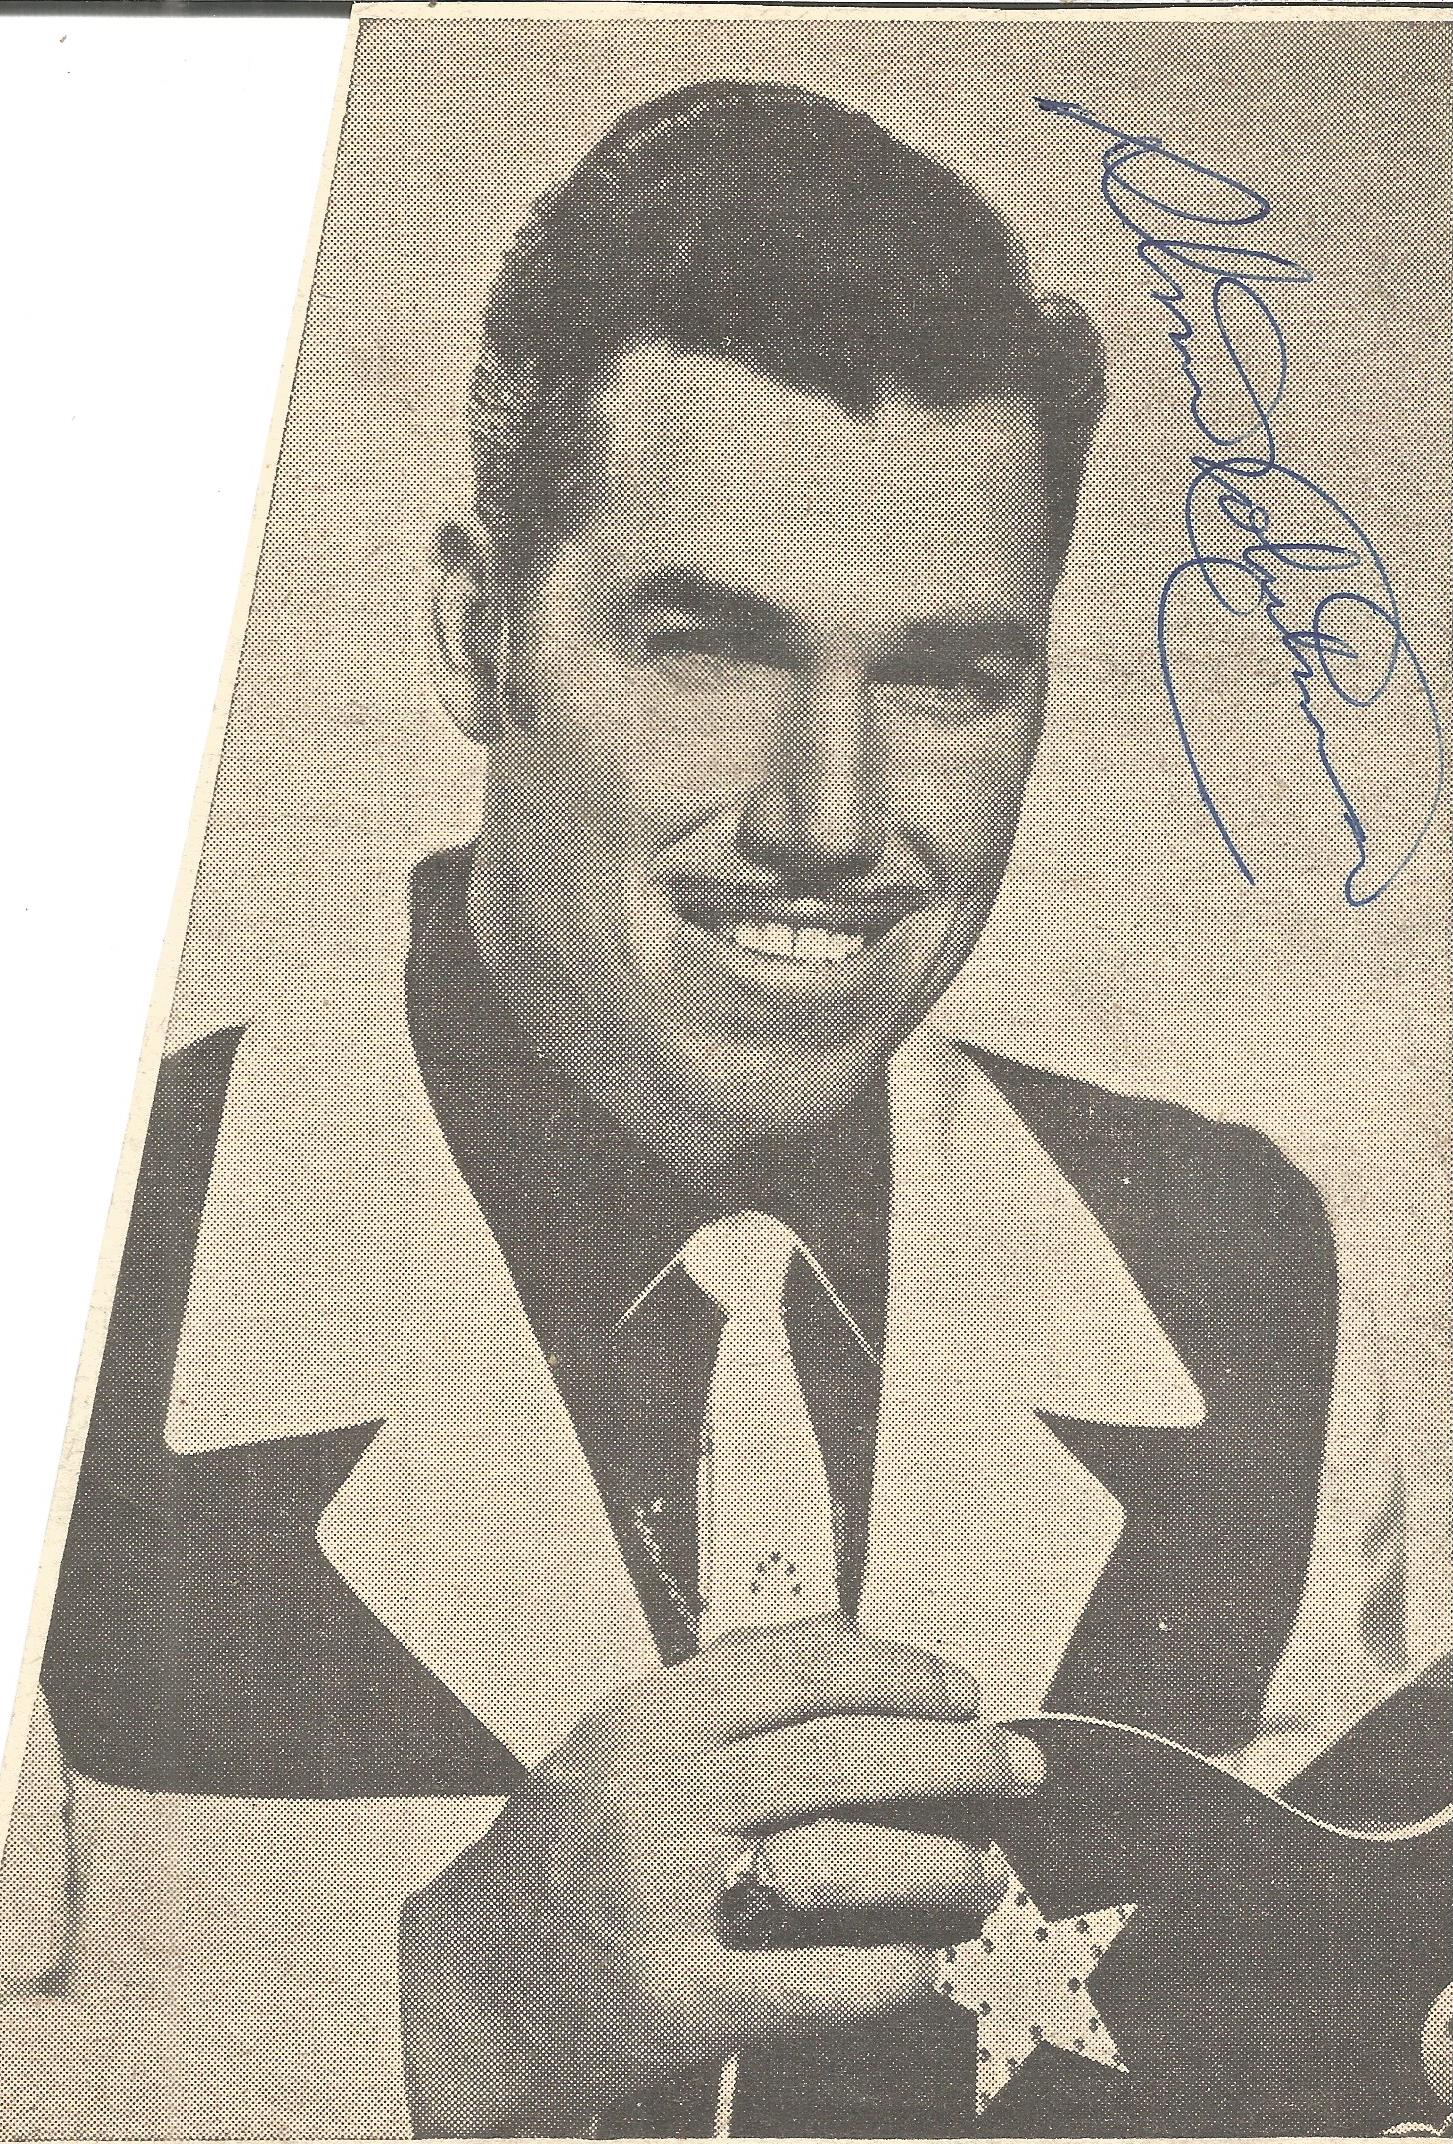 Slim Whitman signed 7 x 4 b/w magazine photo Condition 7/10. All autographs come with a